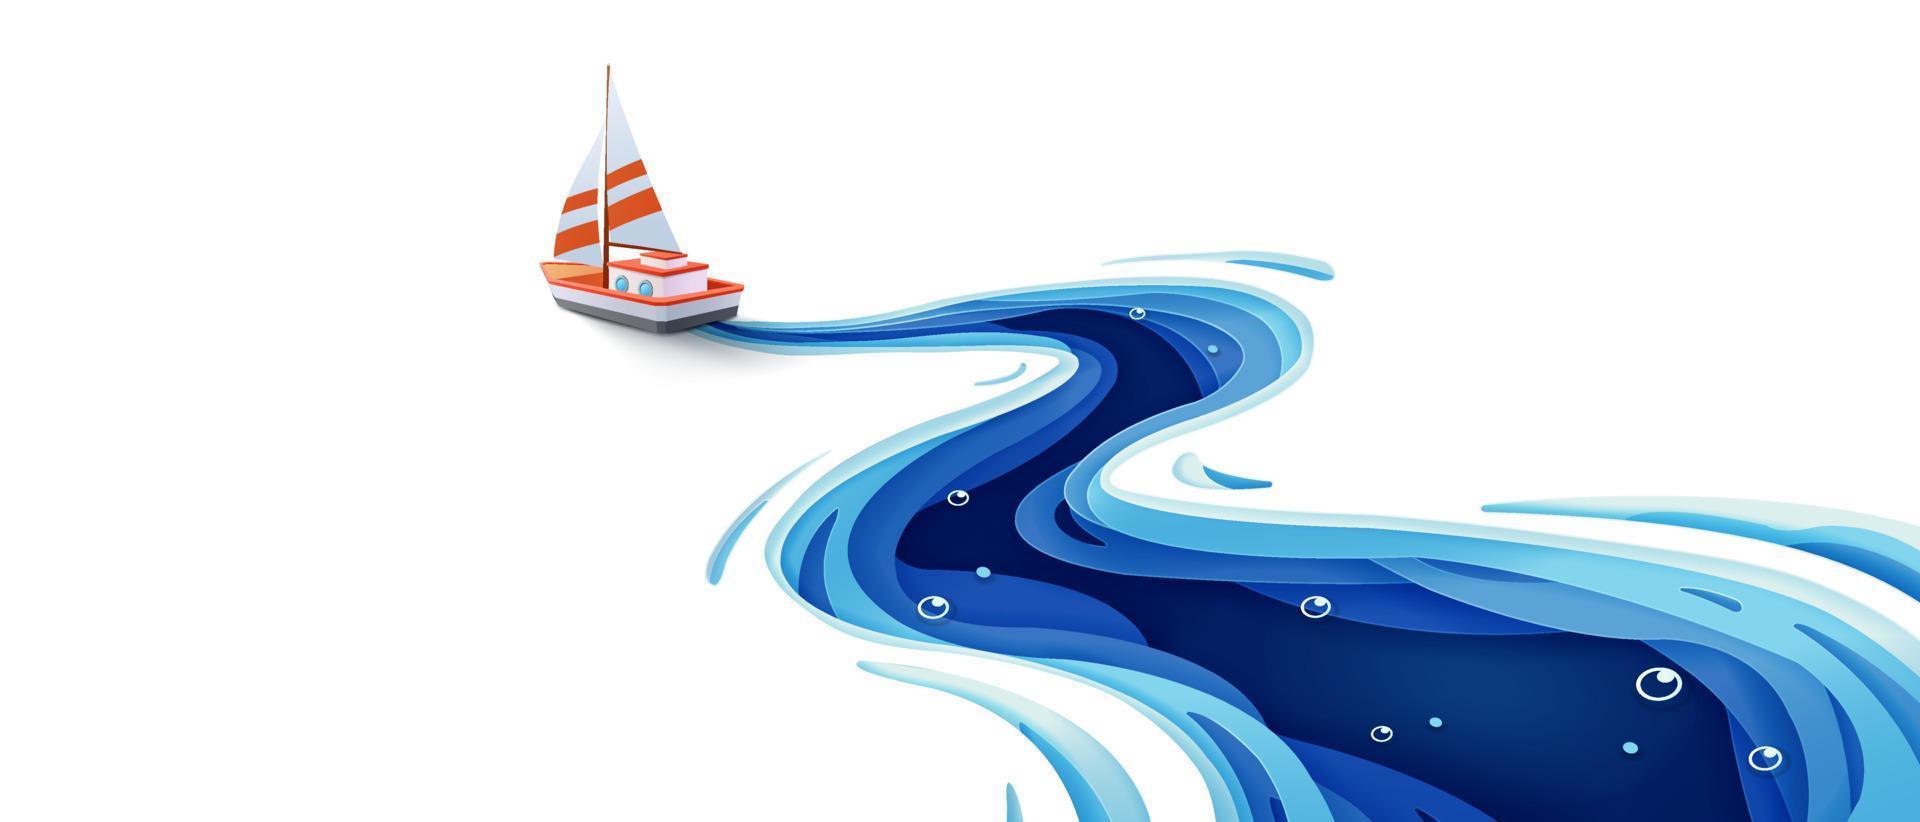 Journey of the paper sailboat in the winding blue sea vector